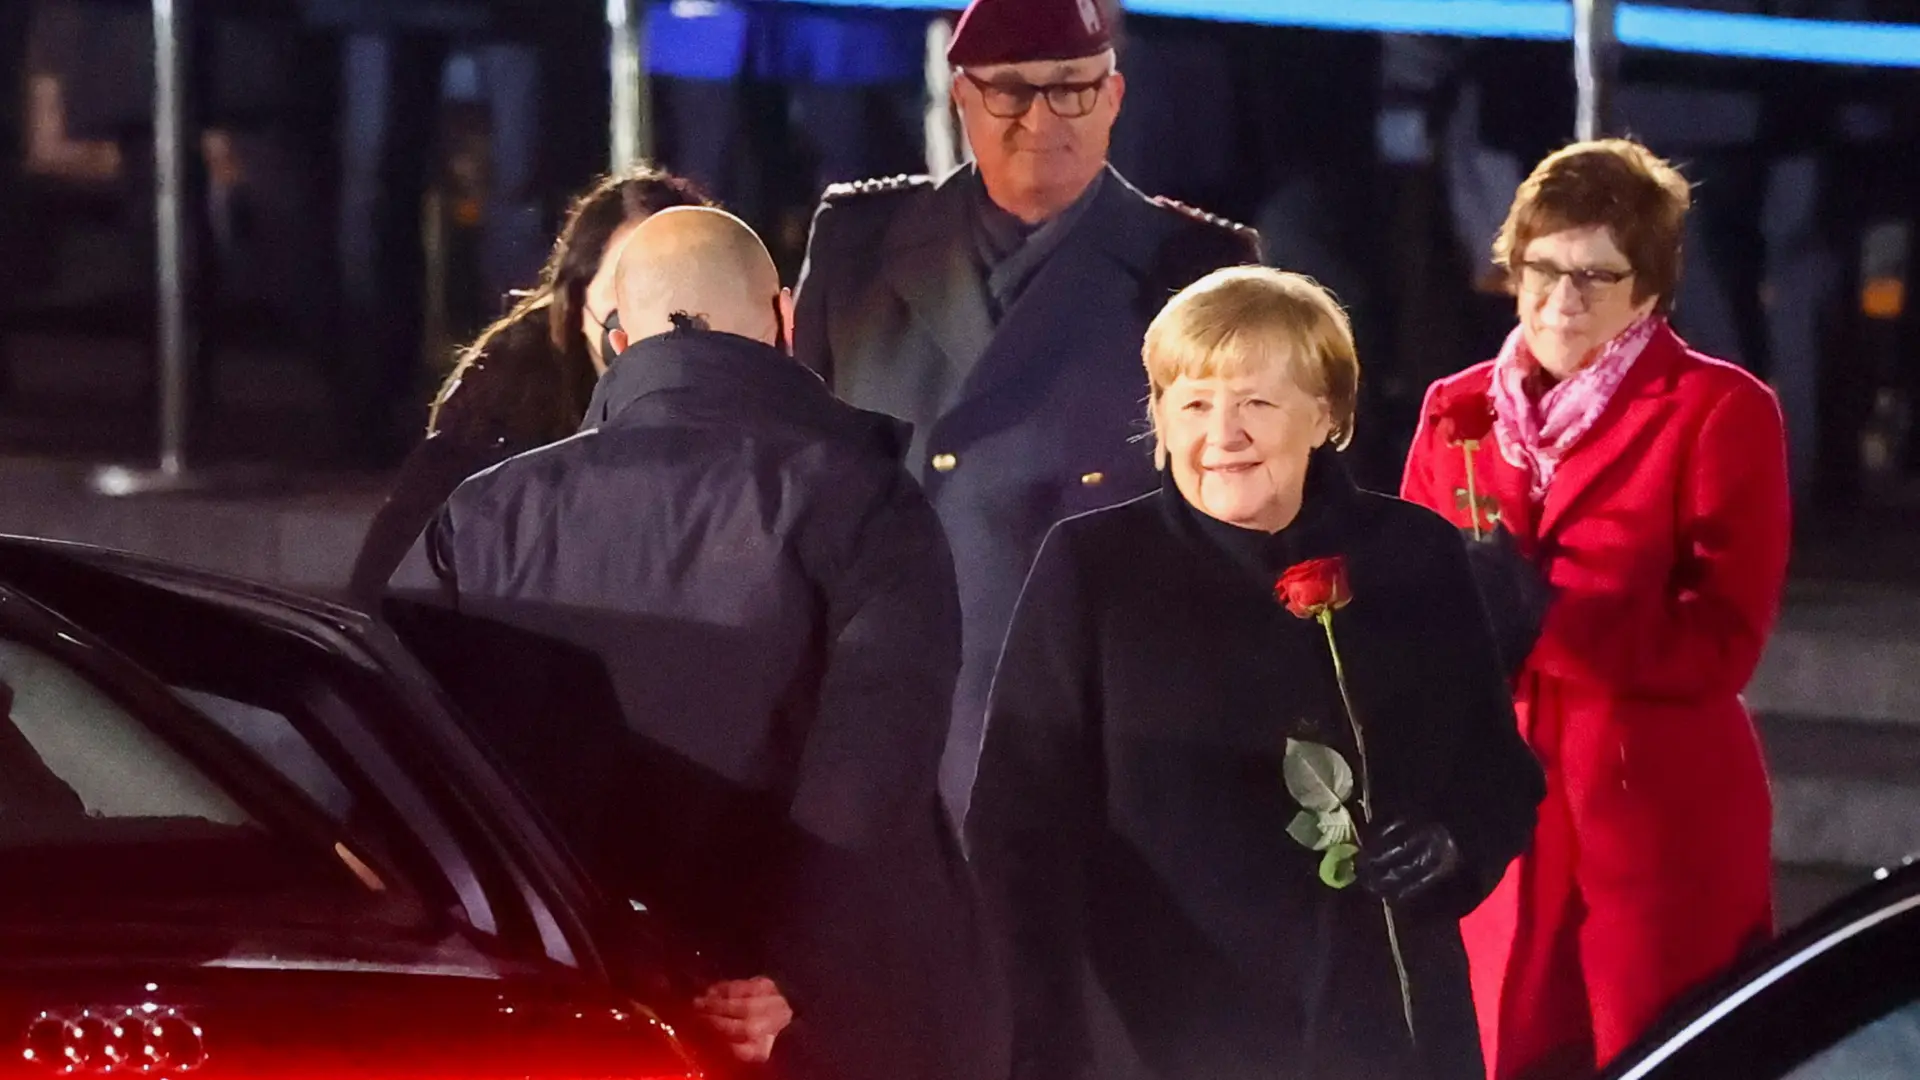 Germany's outgoing Chancellor Angela Merkel holds a rose after attending a Grand Tattoo of the German armed forces Bundeswehr at the Defence Ministry in Berlin, Germany, December 2, 2021. REUTERS/Hannibal Hanschke GERMANY-MERKEL/CEREMONY